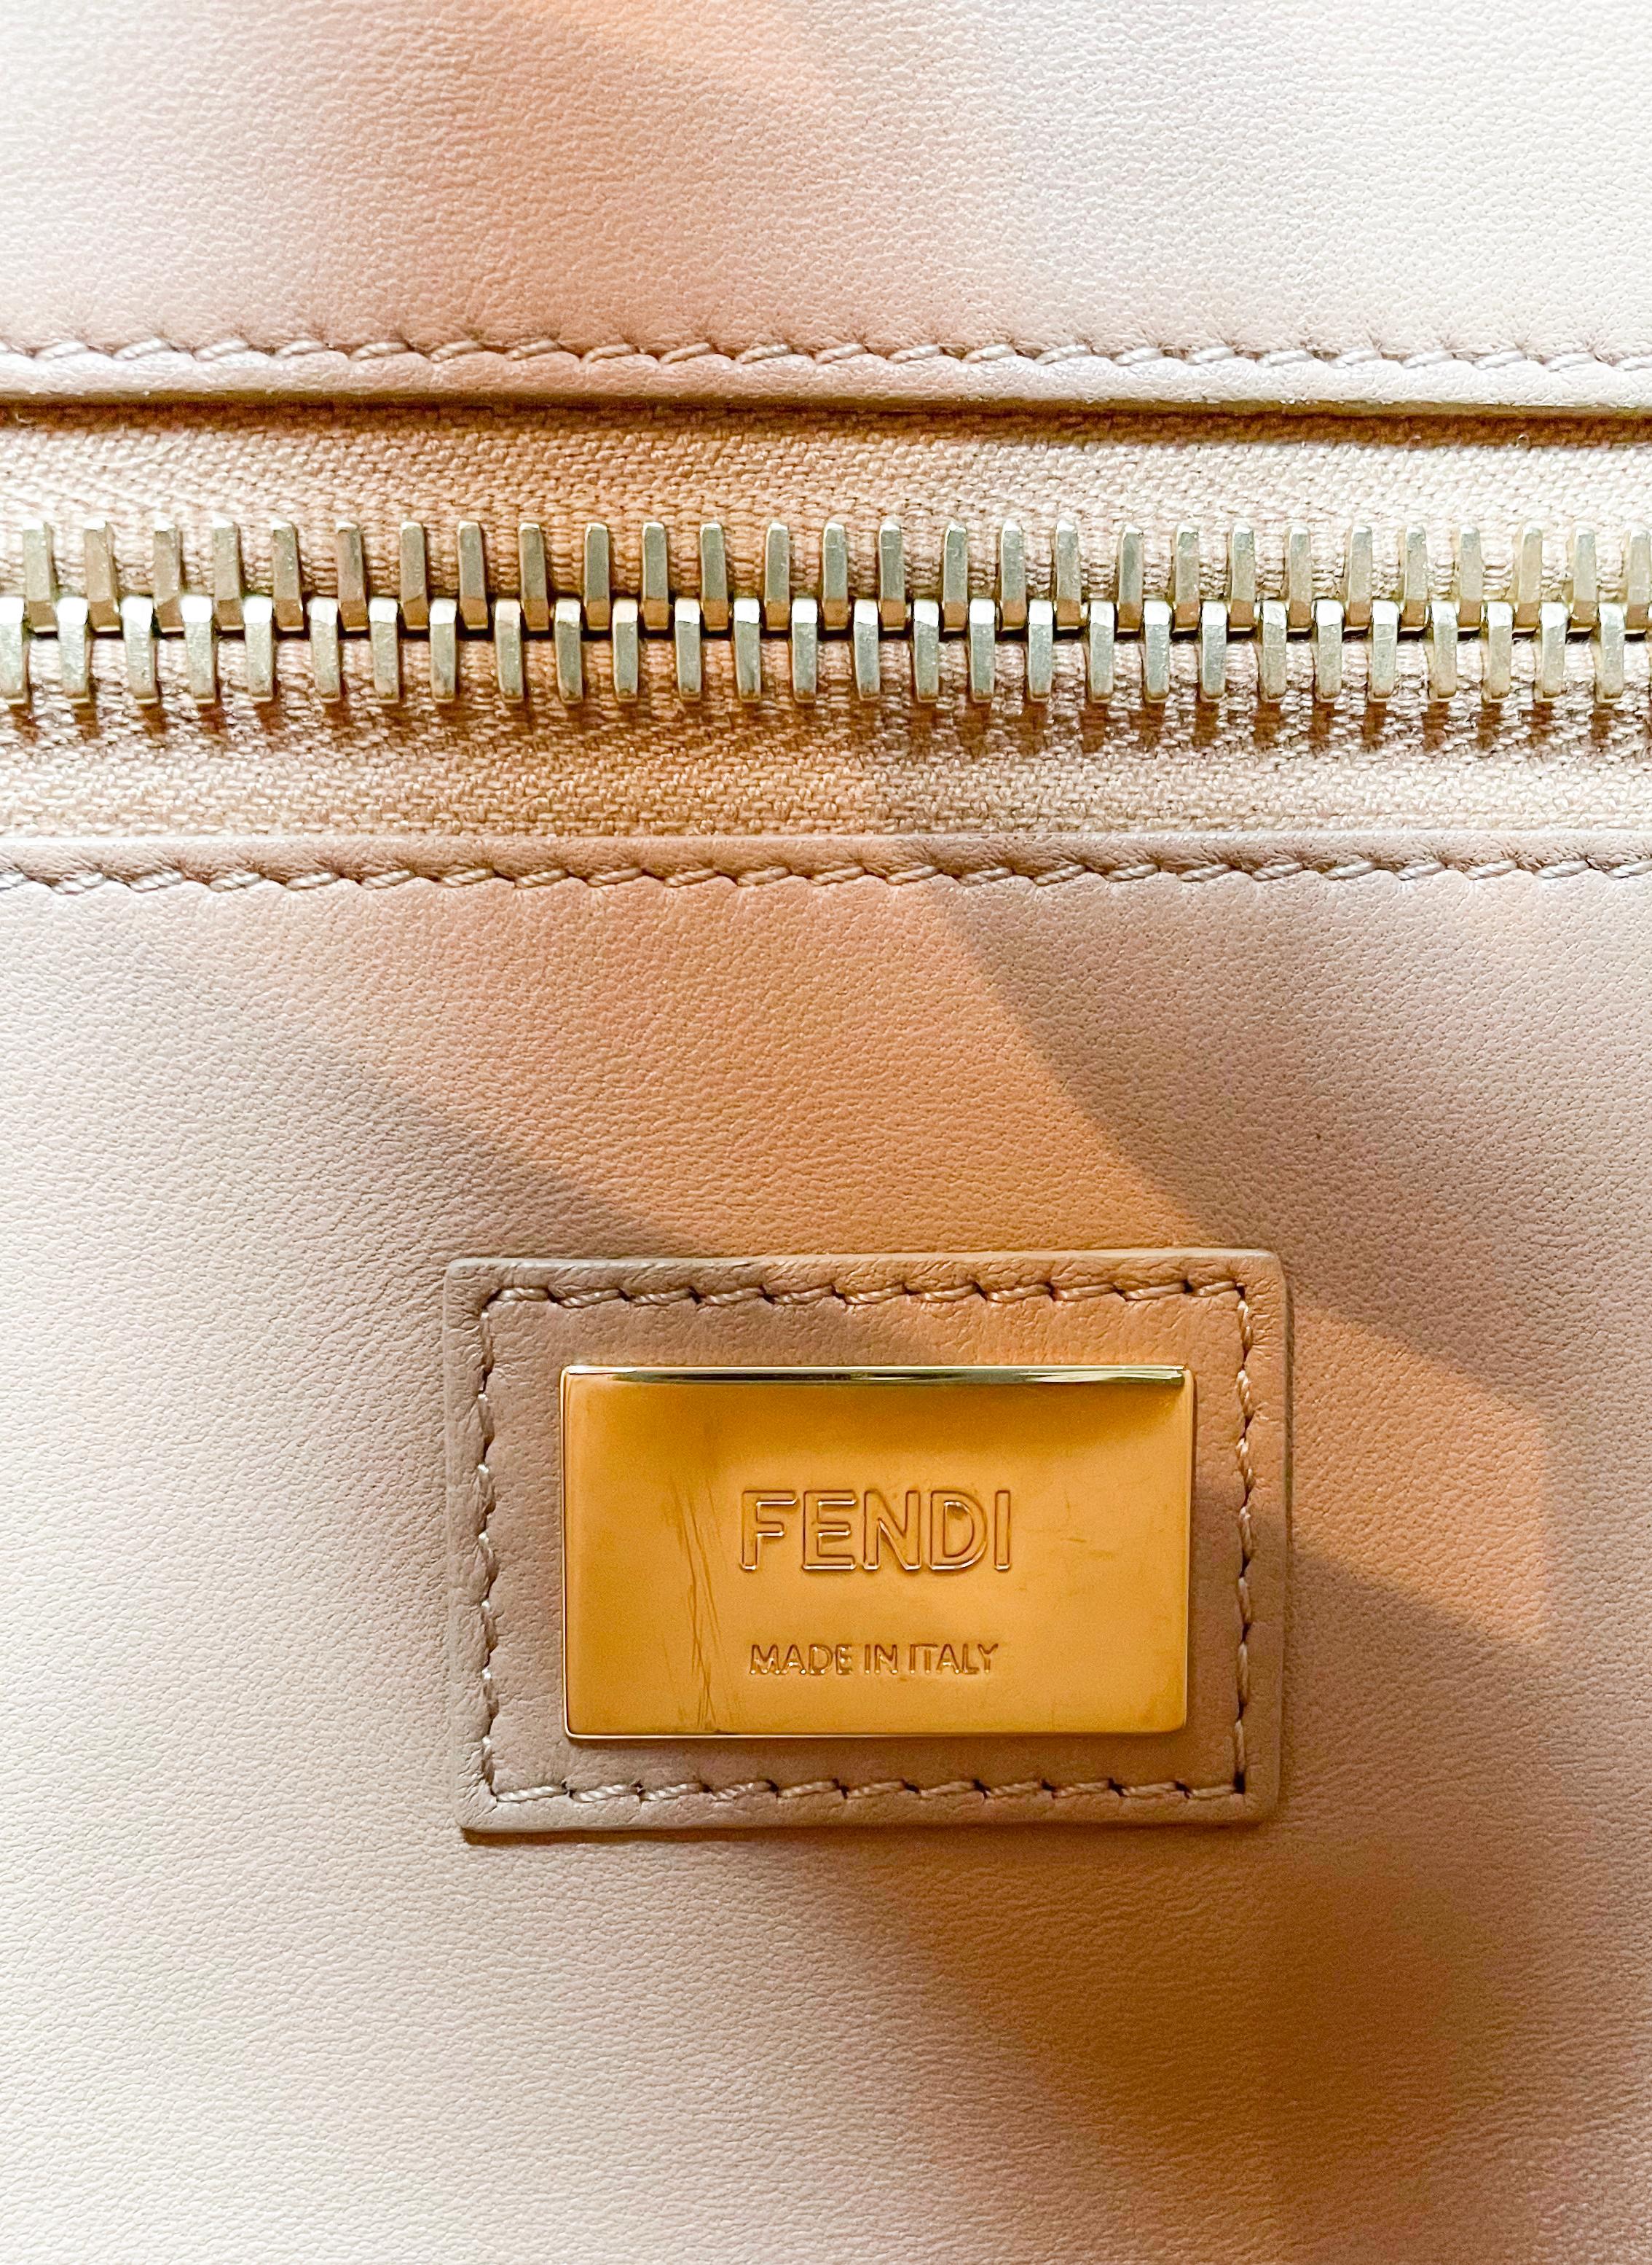 Fendi Peekaboo Limited Edition Embroidered bag, 2010s In Good Condition In New York, NY